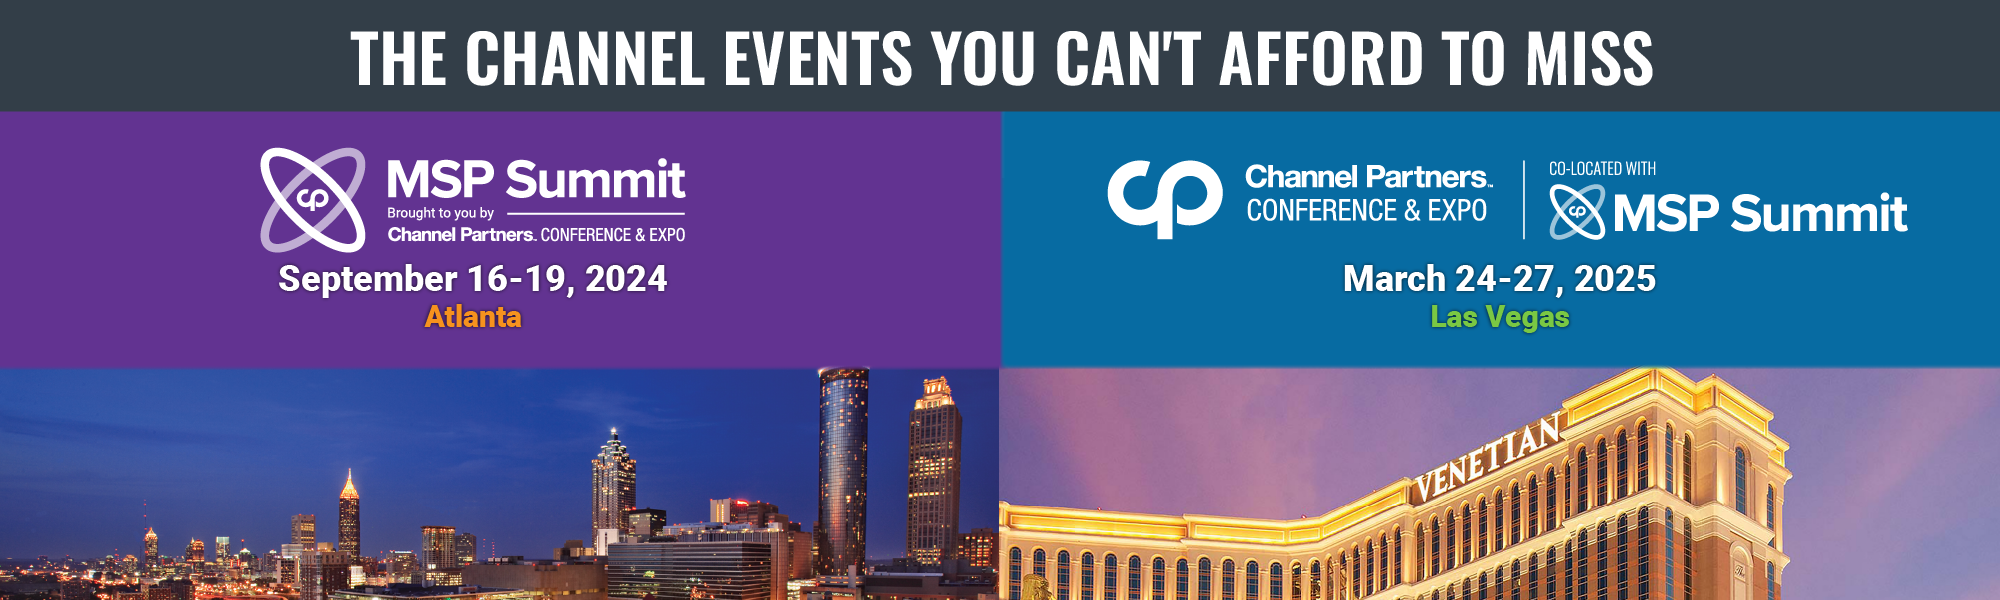 The Channel Events You Can't Afford to Miss. MSP Summit, brought to you by Channel Partners Conference & Expo, September 16-19, 2024 in Atlanta, and Channel Partners Conference & Expo, co-located with MSP Summit, March 24-27, 2025 in Las Vegas.